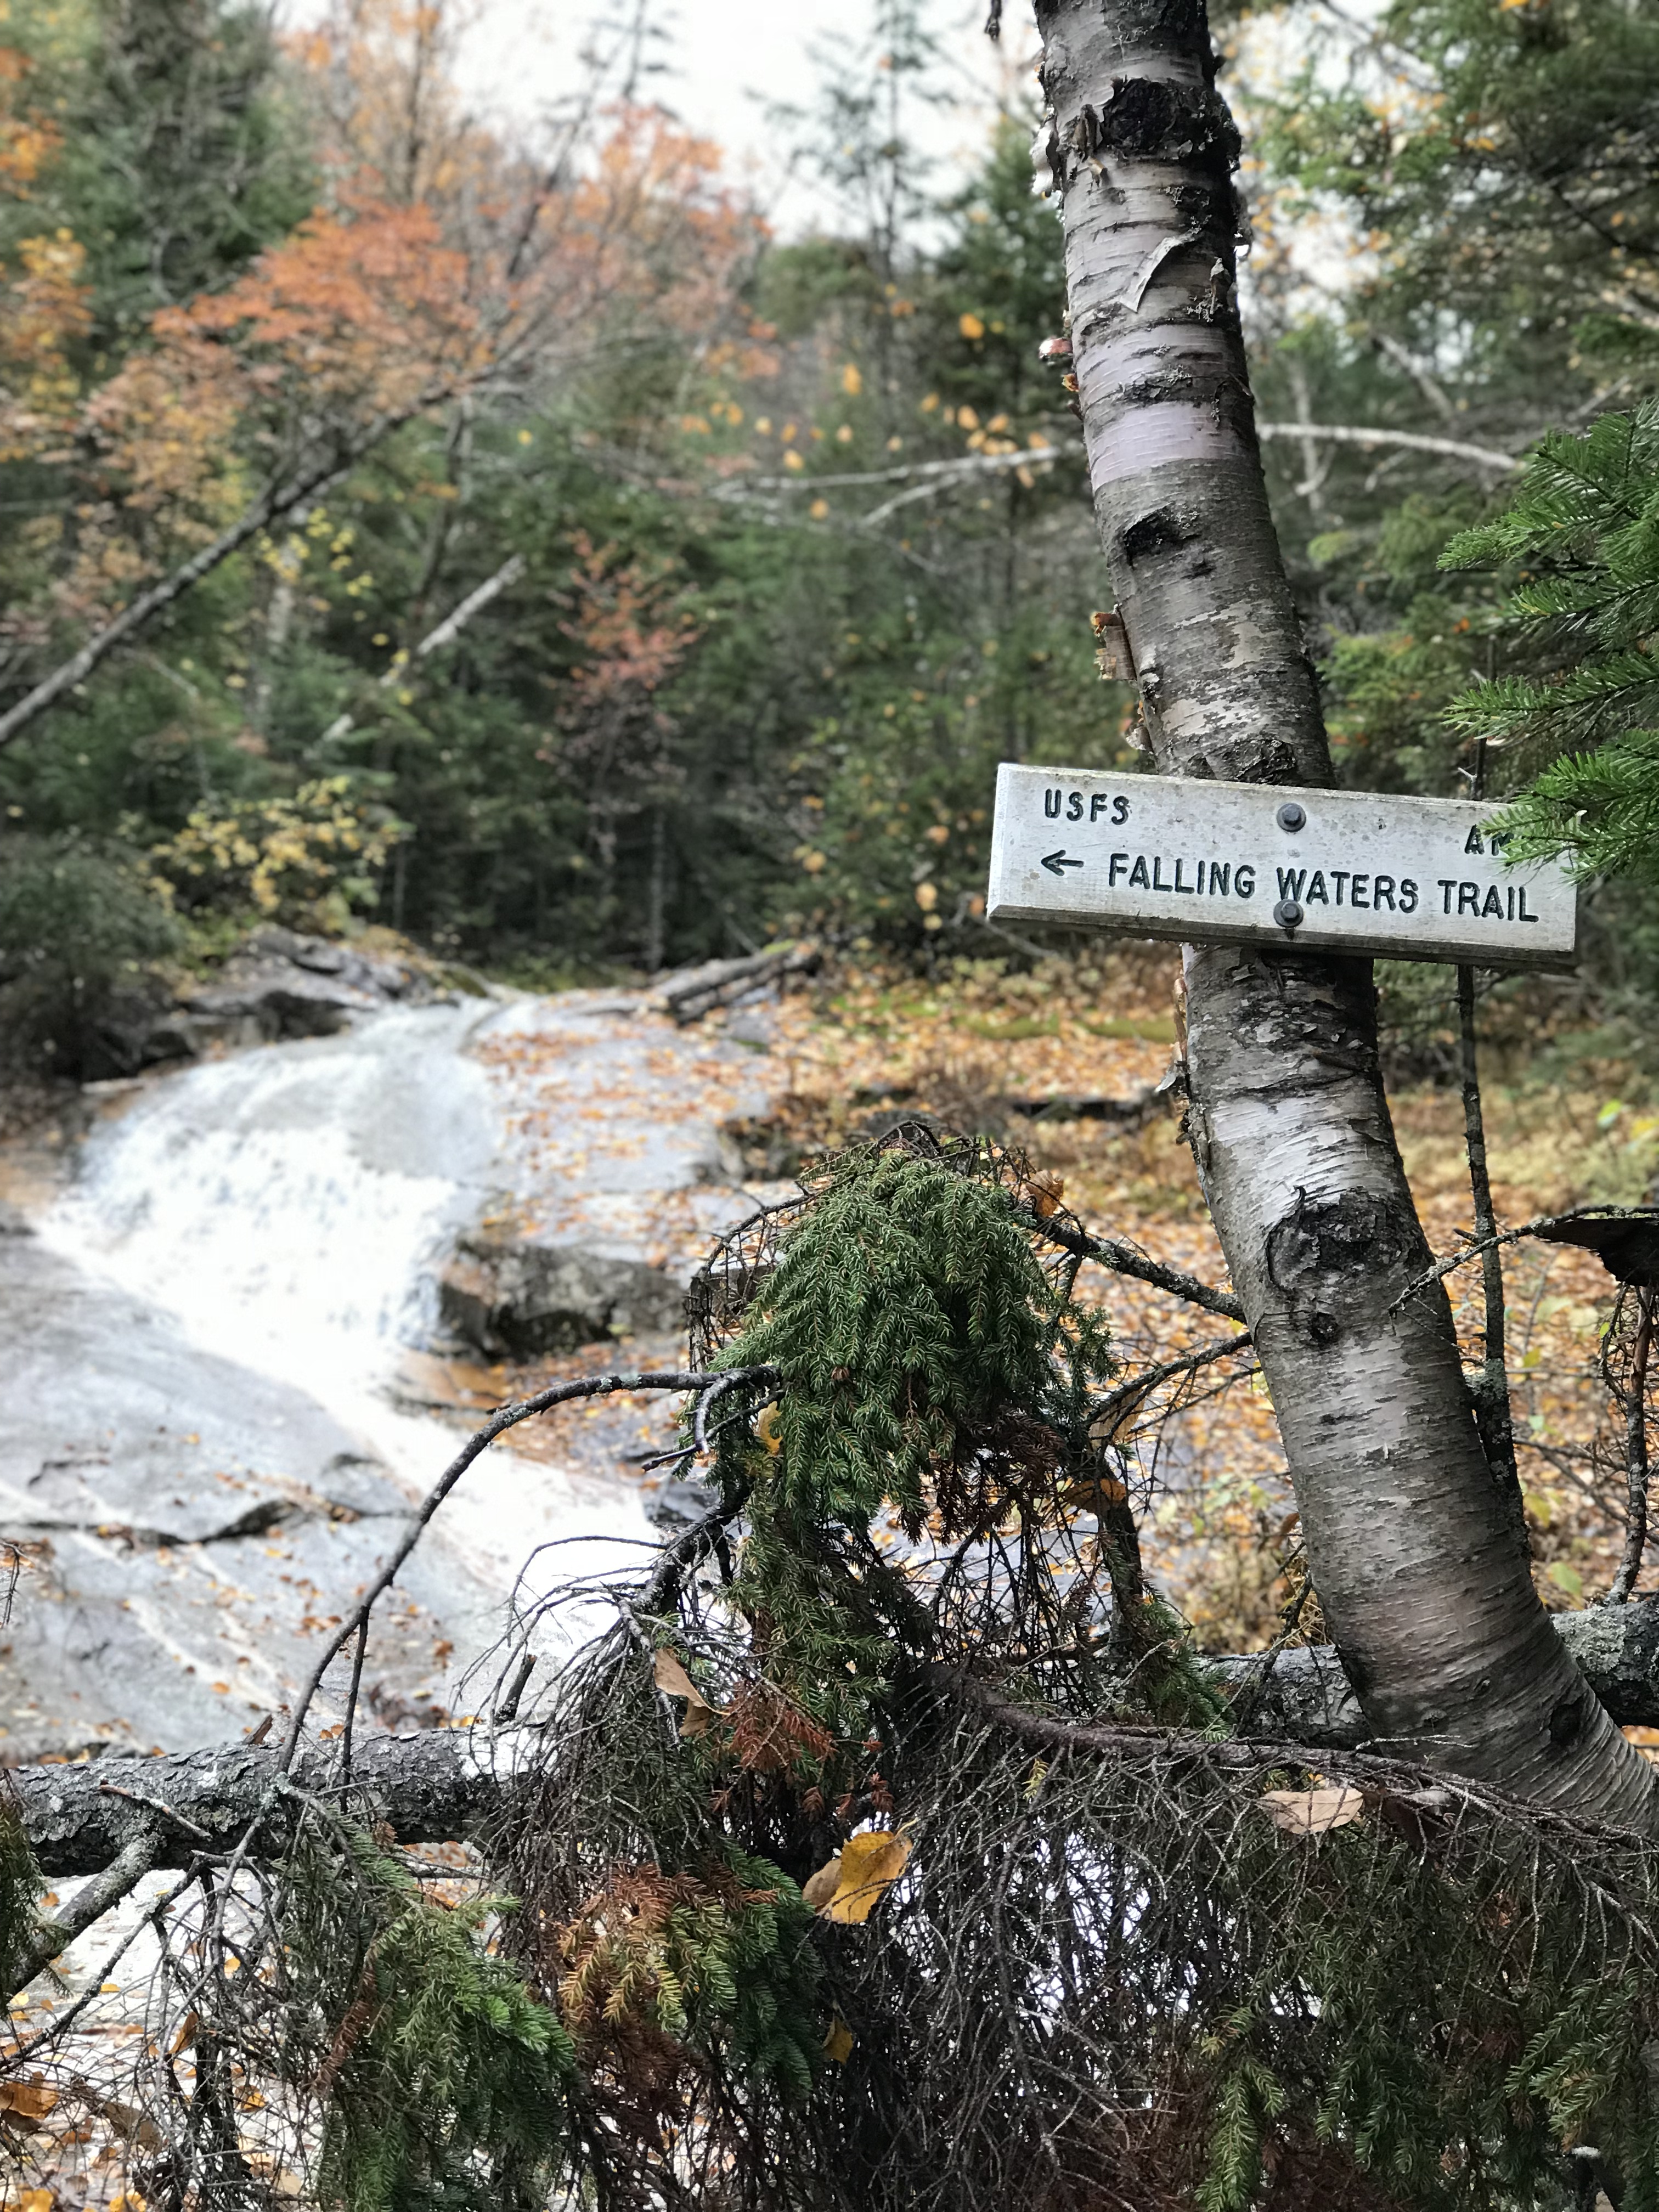 Falling waters trail sign (portrait mode)